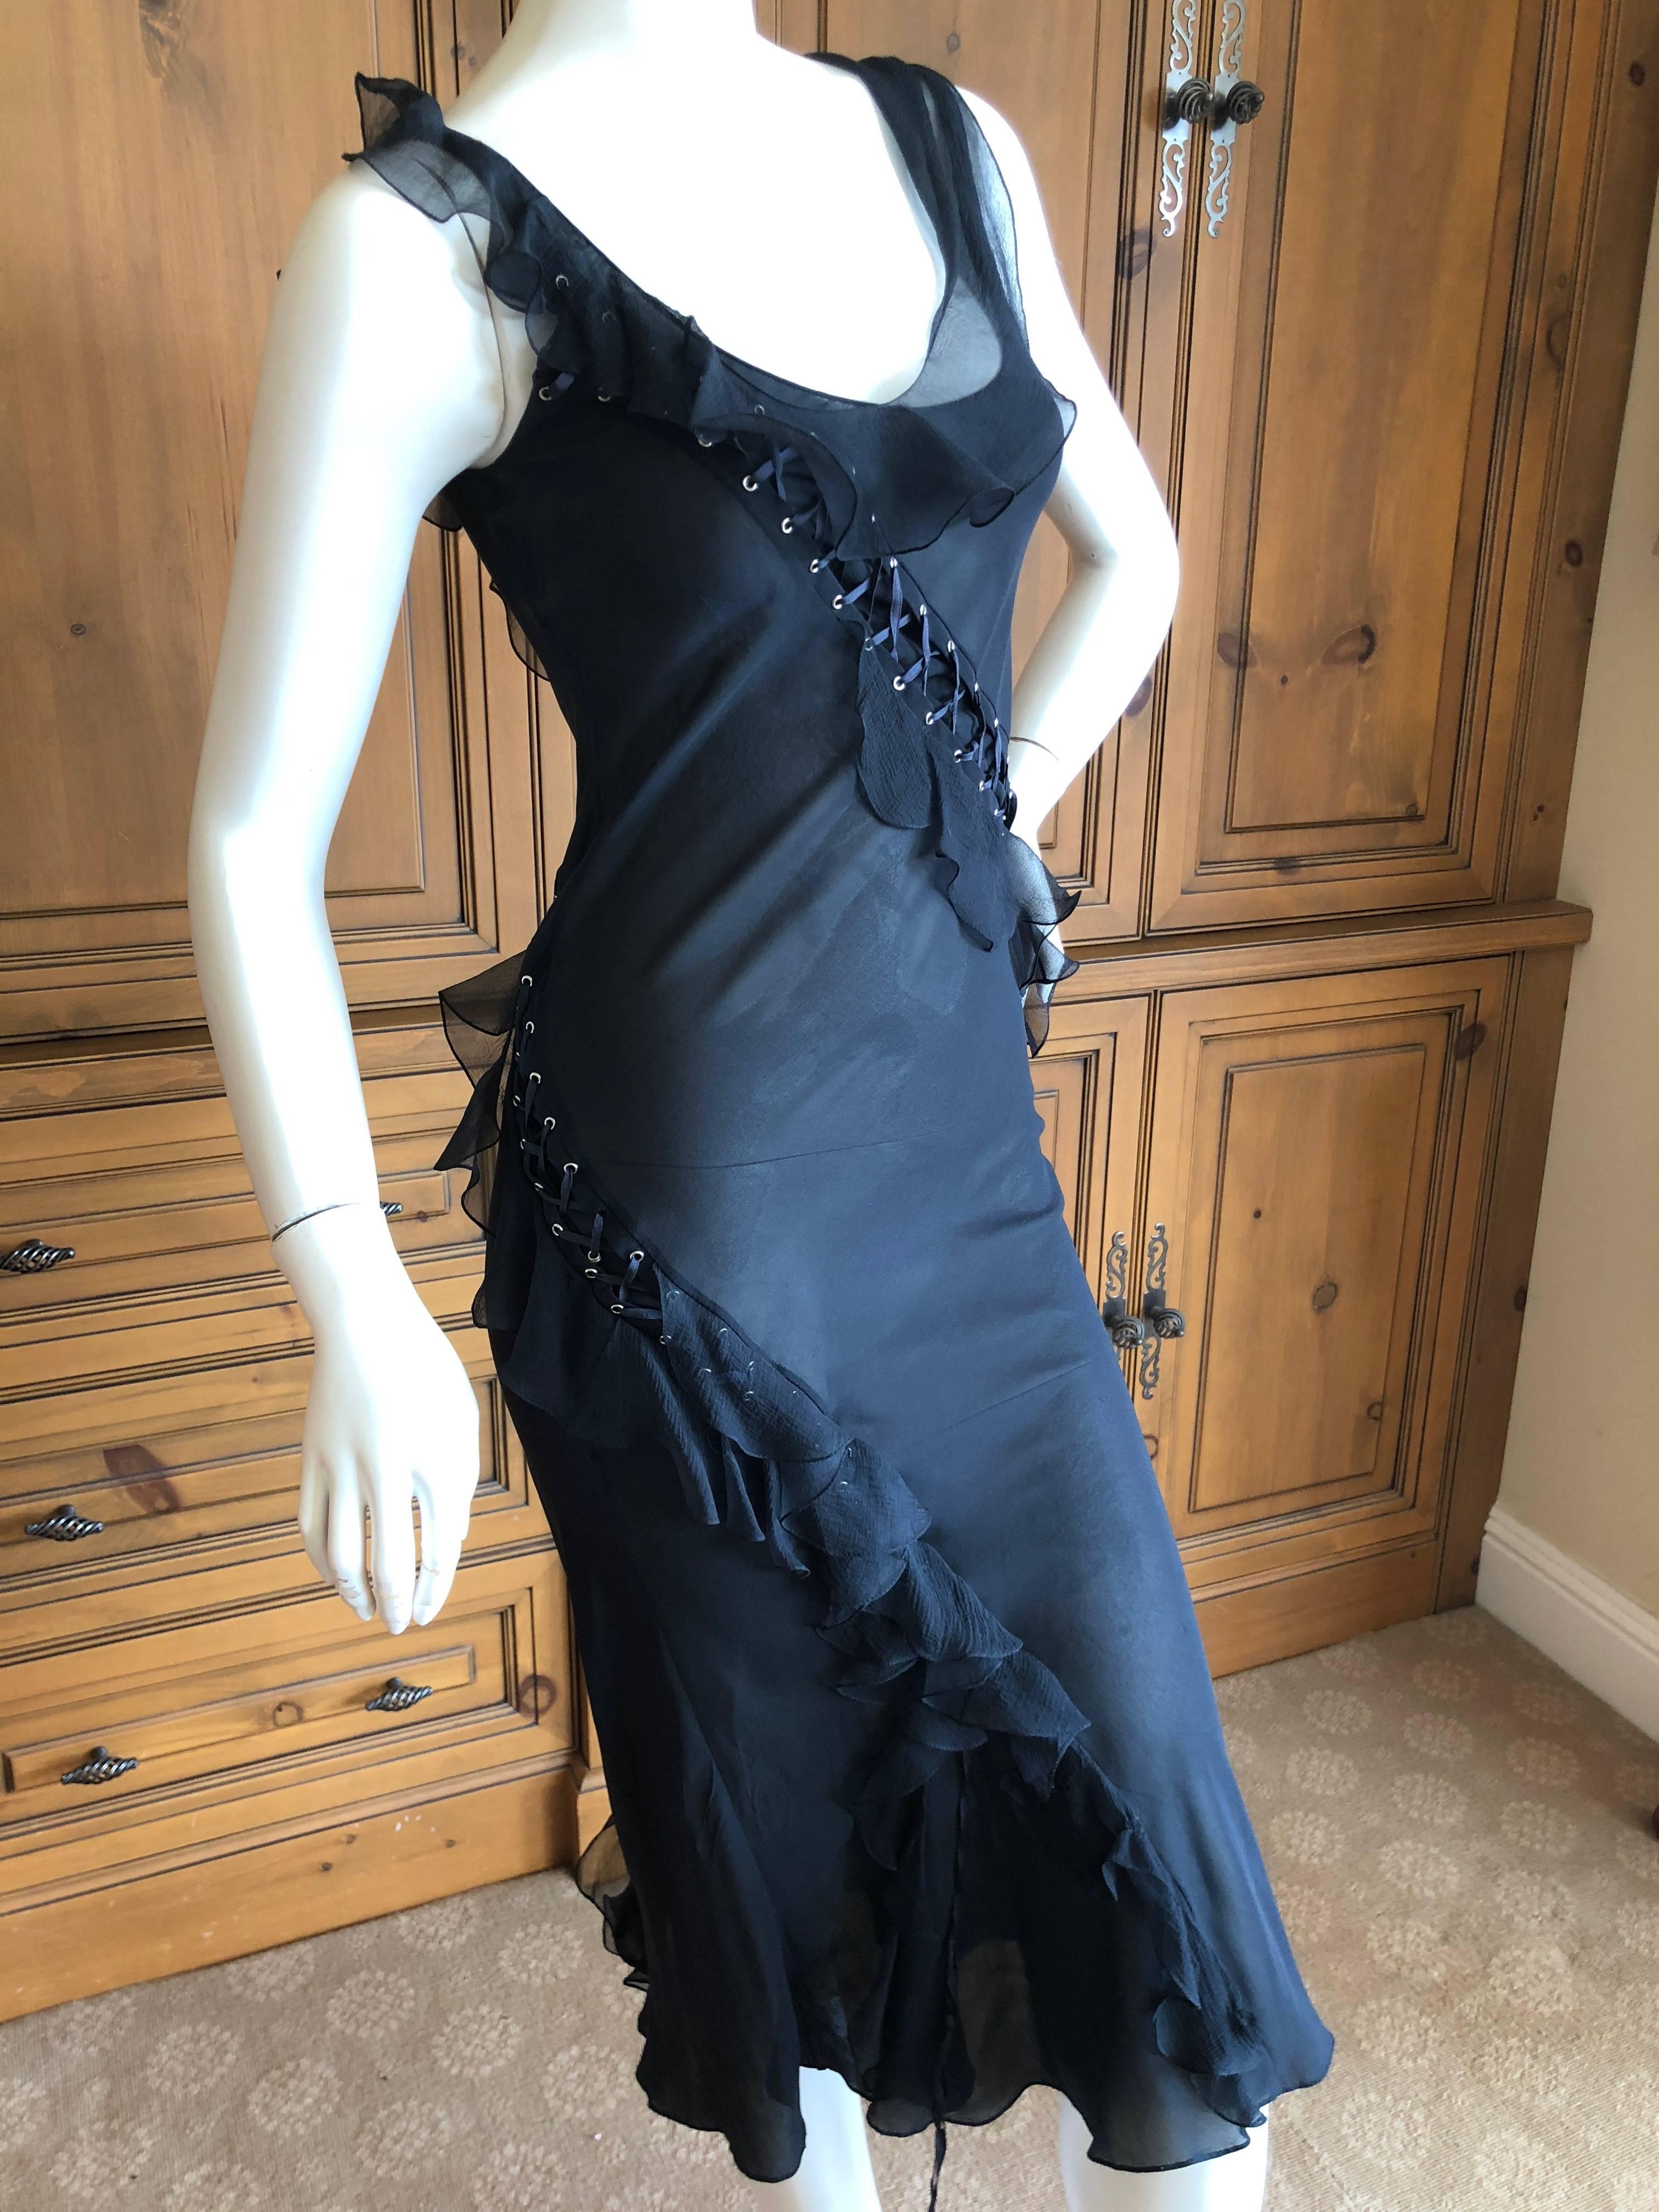 Christian Dior by John Galliano Vintage Sheer Black Dress with Spiraling Corset Lace Details.
Comes with slip, it is not intended to be worn so sheer, 
but many of my customers prefer it, so thats how I show it.
Sample, from Paris.
I have had this